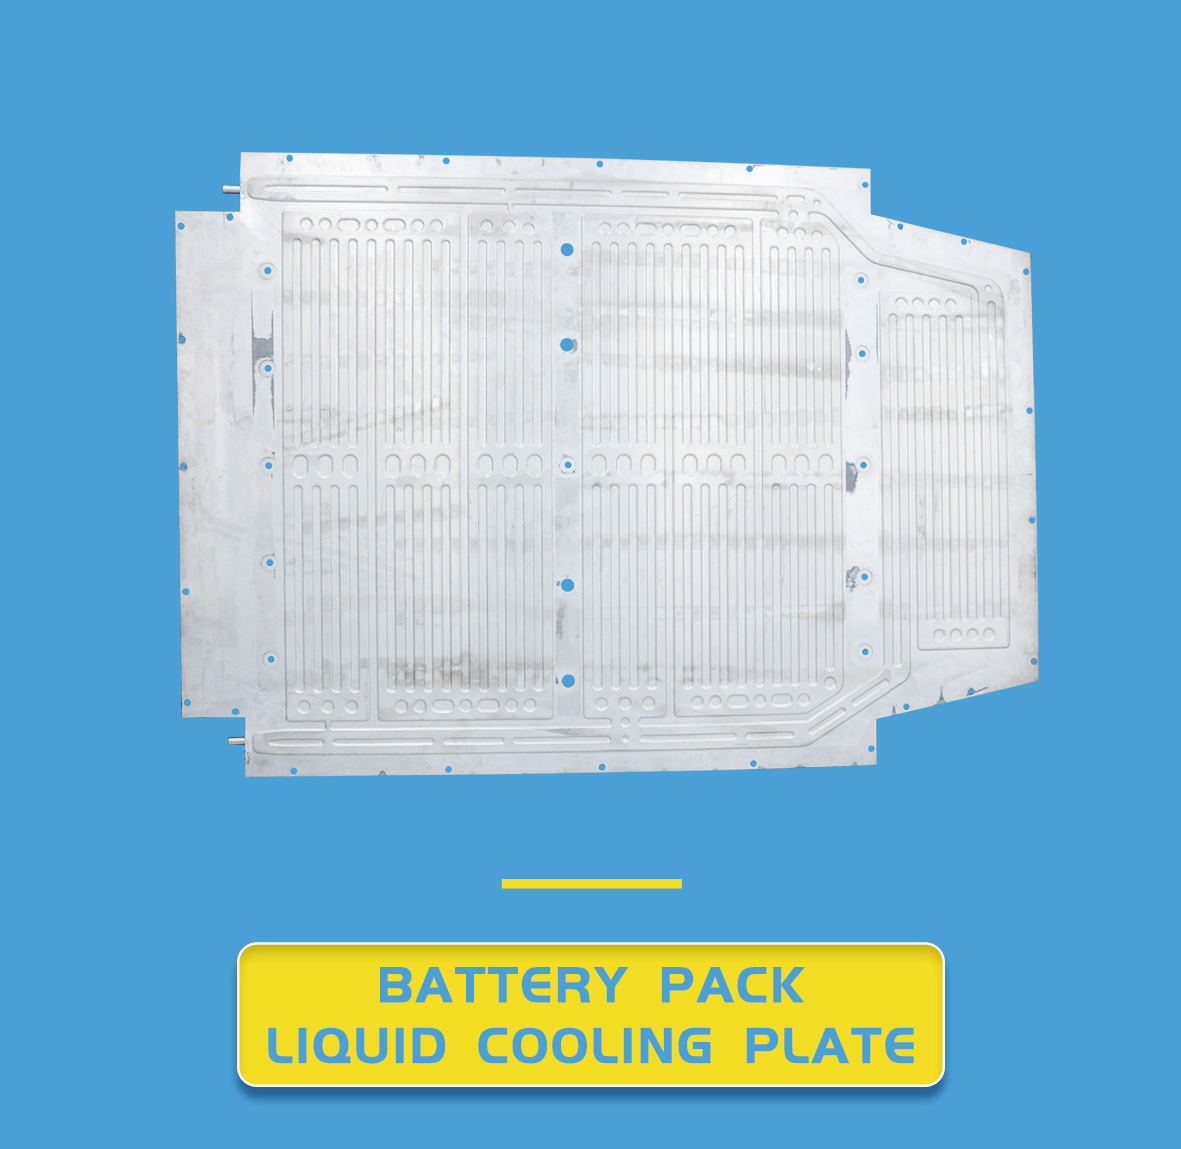 BATTERY PACKIQUID COOLING PLATE 2